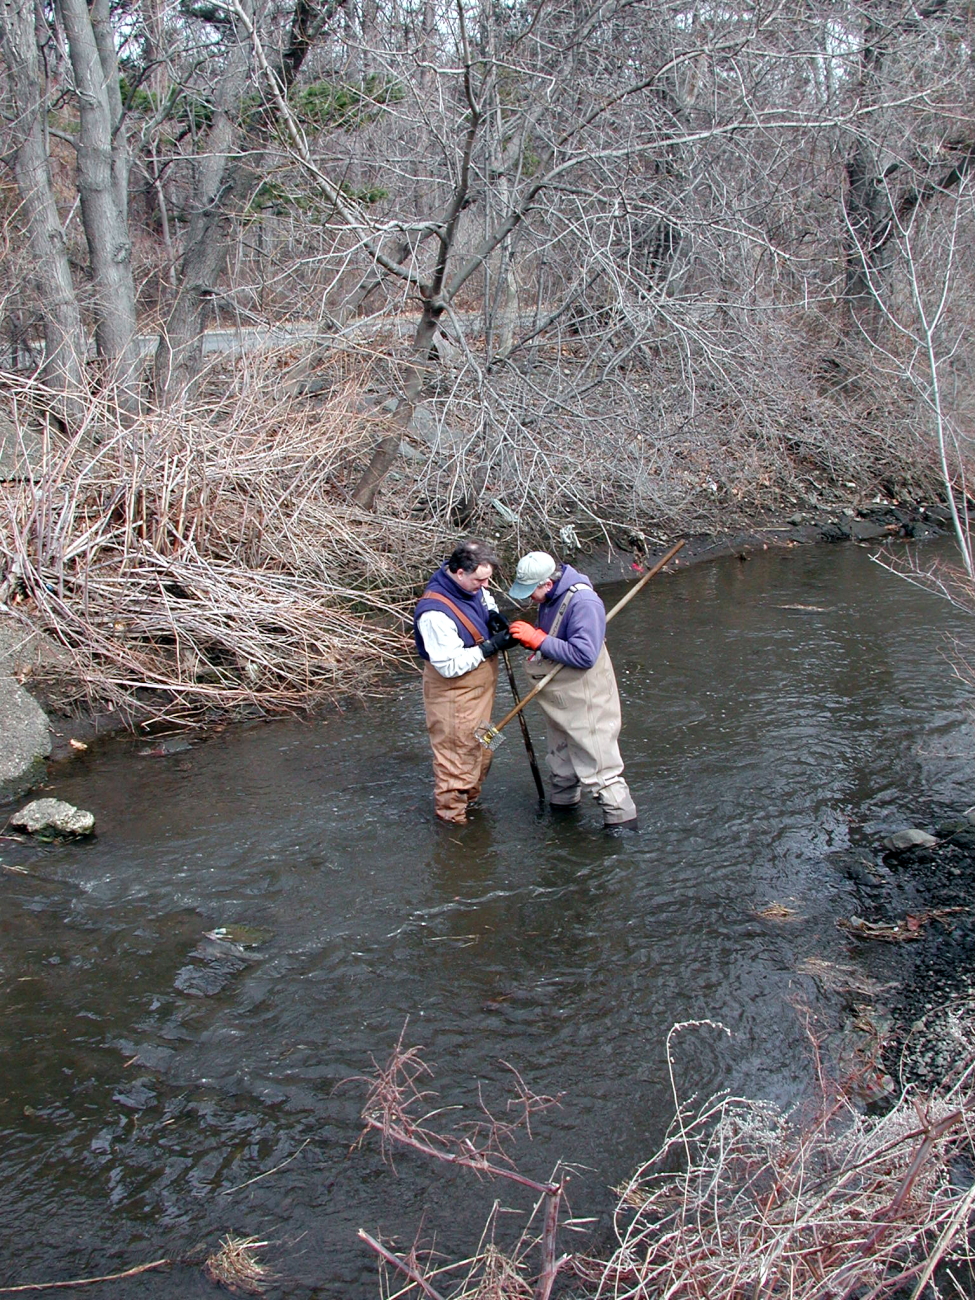 State biologists Brad Chase and Mike Armstrong search for smelt eggs